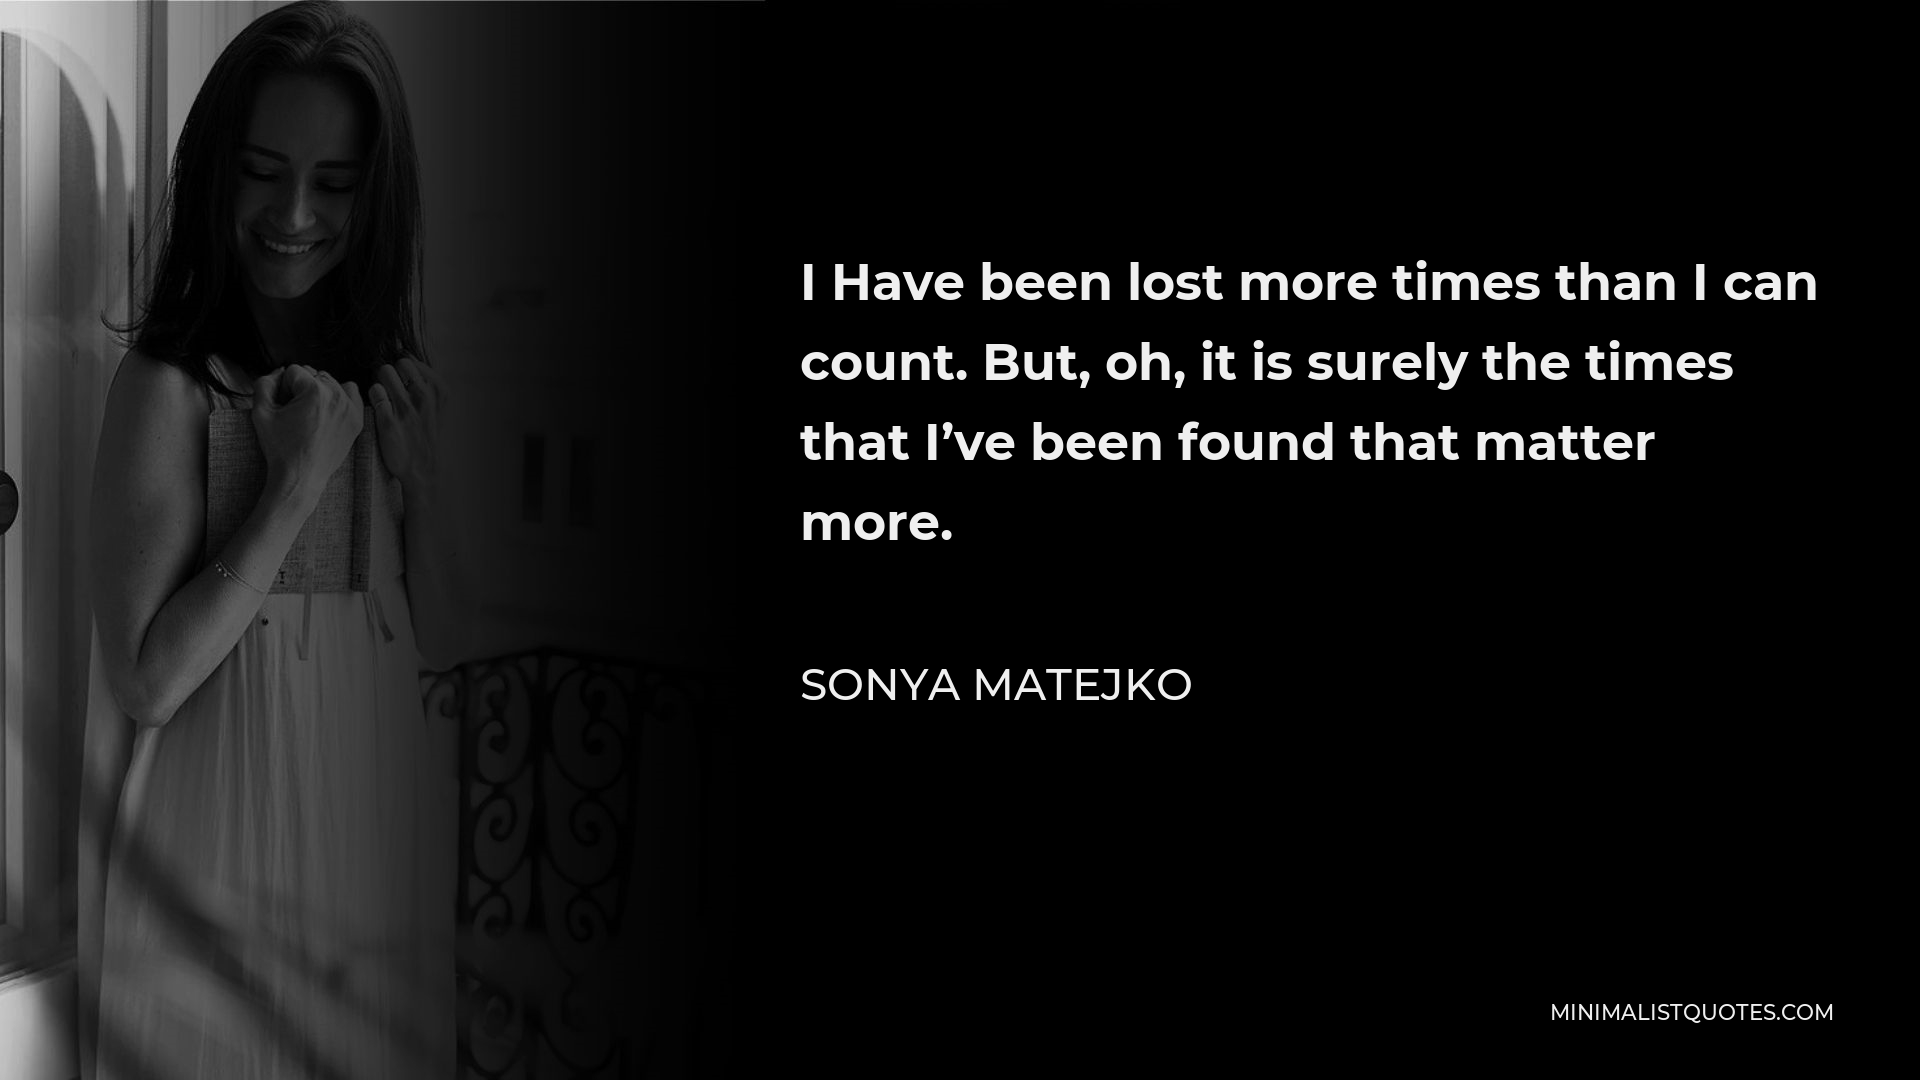 Sonya Matejko Quote - I Have been lost more times than I can count. But, oh, it is surely the times that I’ve been found that matter more.